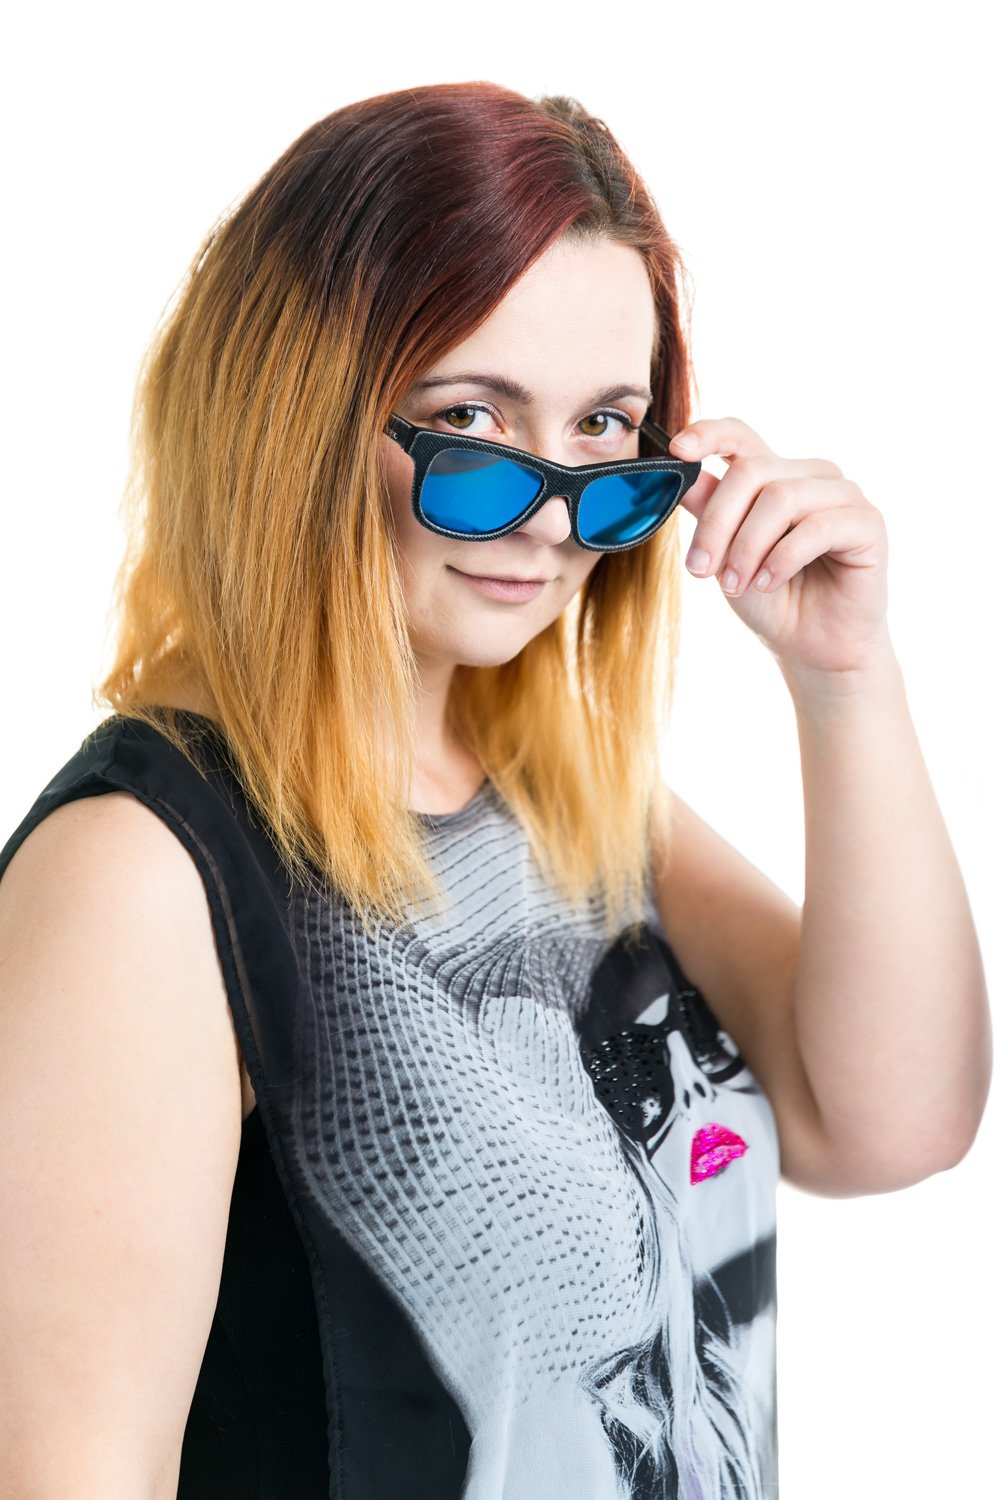 Maggie high key portrait with sunglasses